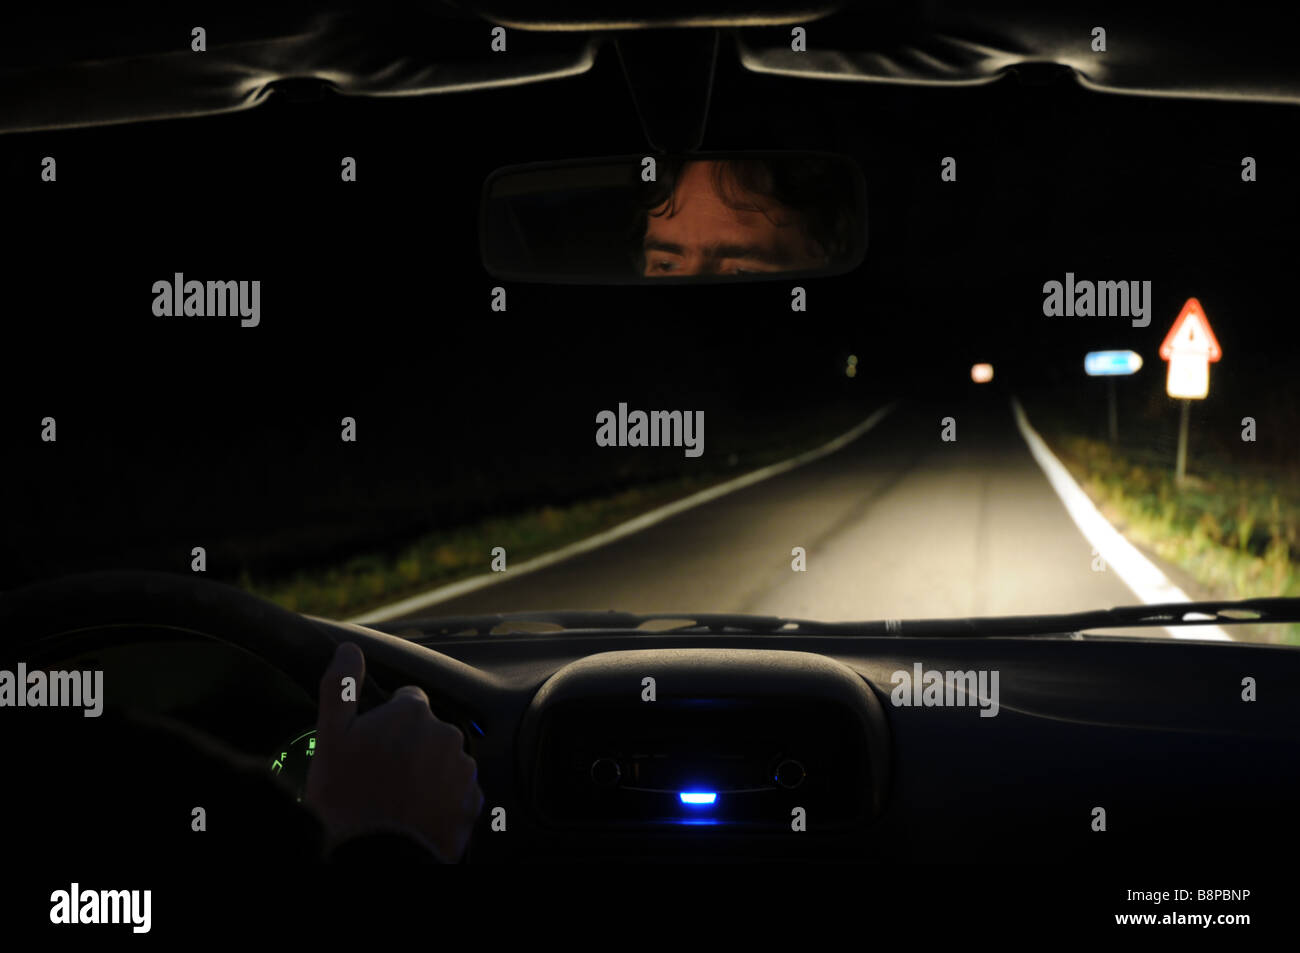 Driving in the night - view from the cabin of a car. Stock Photo